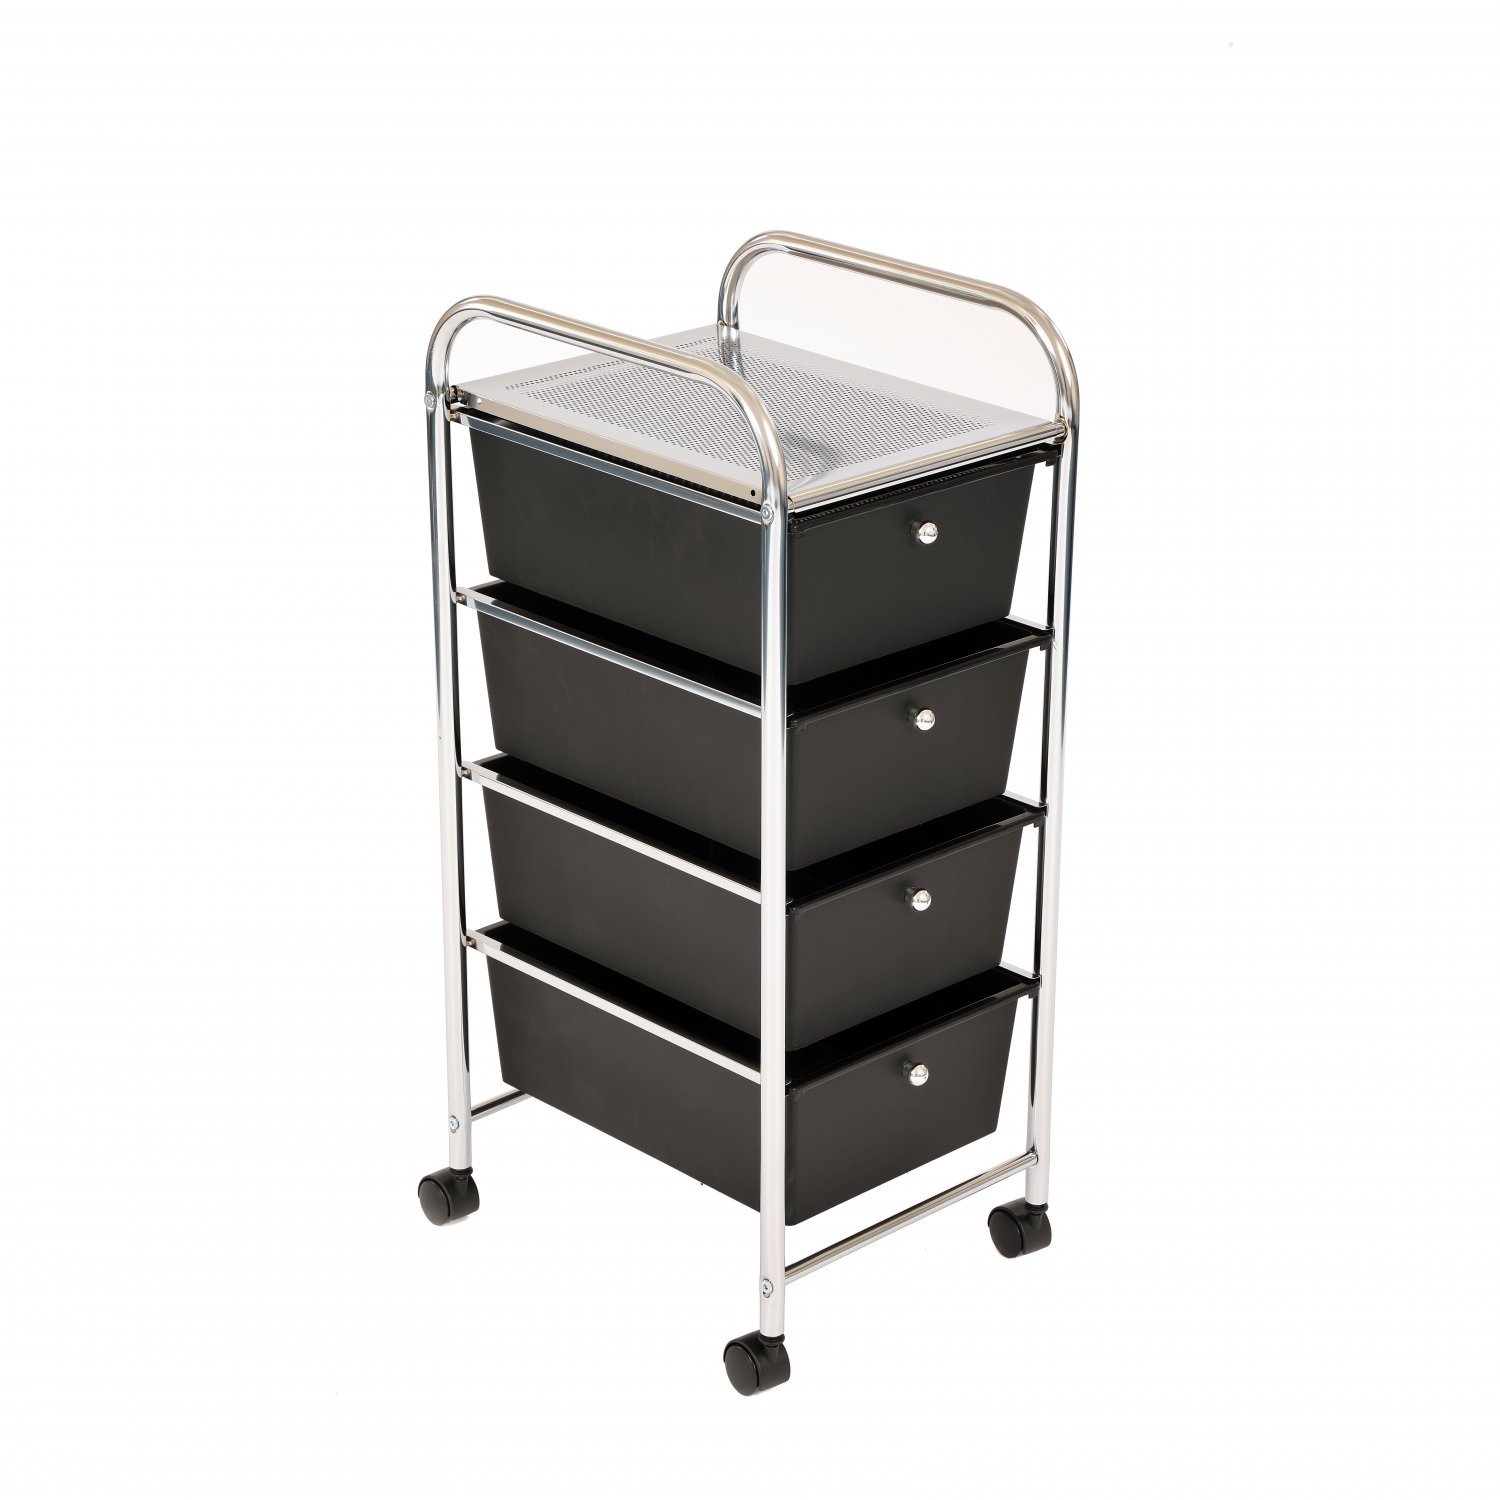 Your Home 4 Drawer Mobile Storage Salon Trolley,Home Office White Hairdressing Craft Beauty & Make-up Accessories Organiser with Castor Wheels 